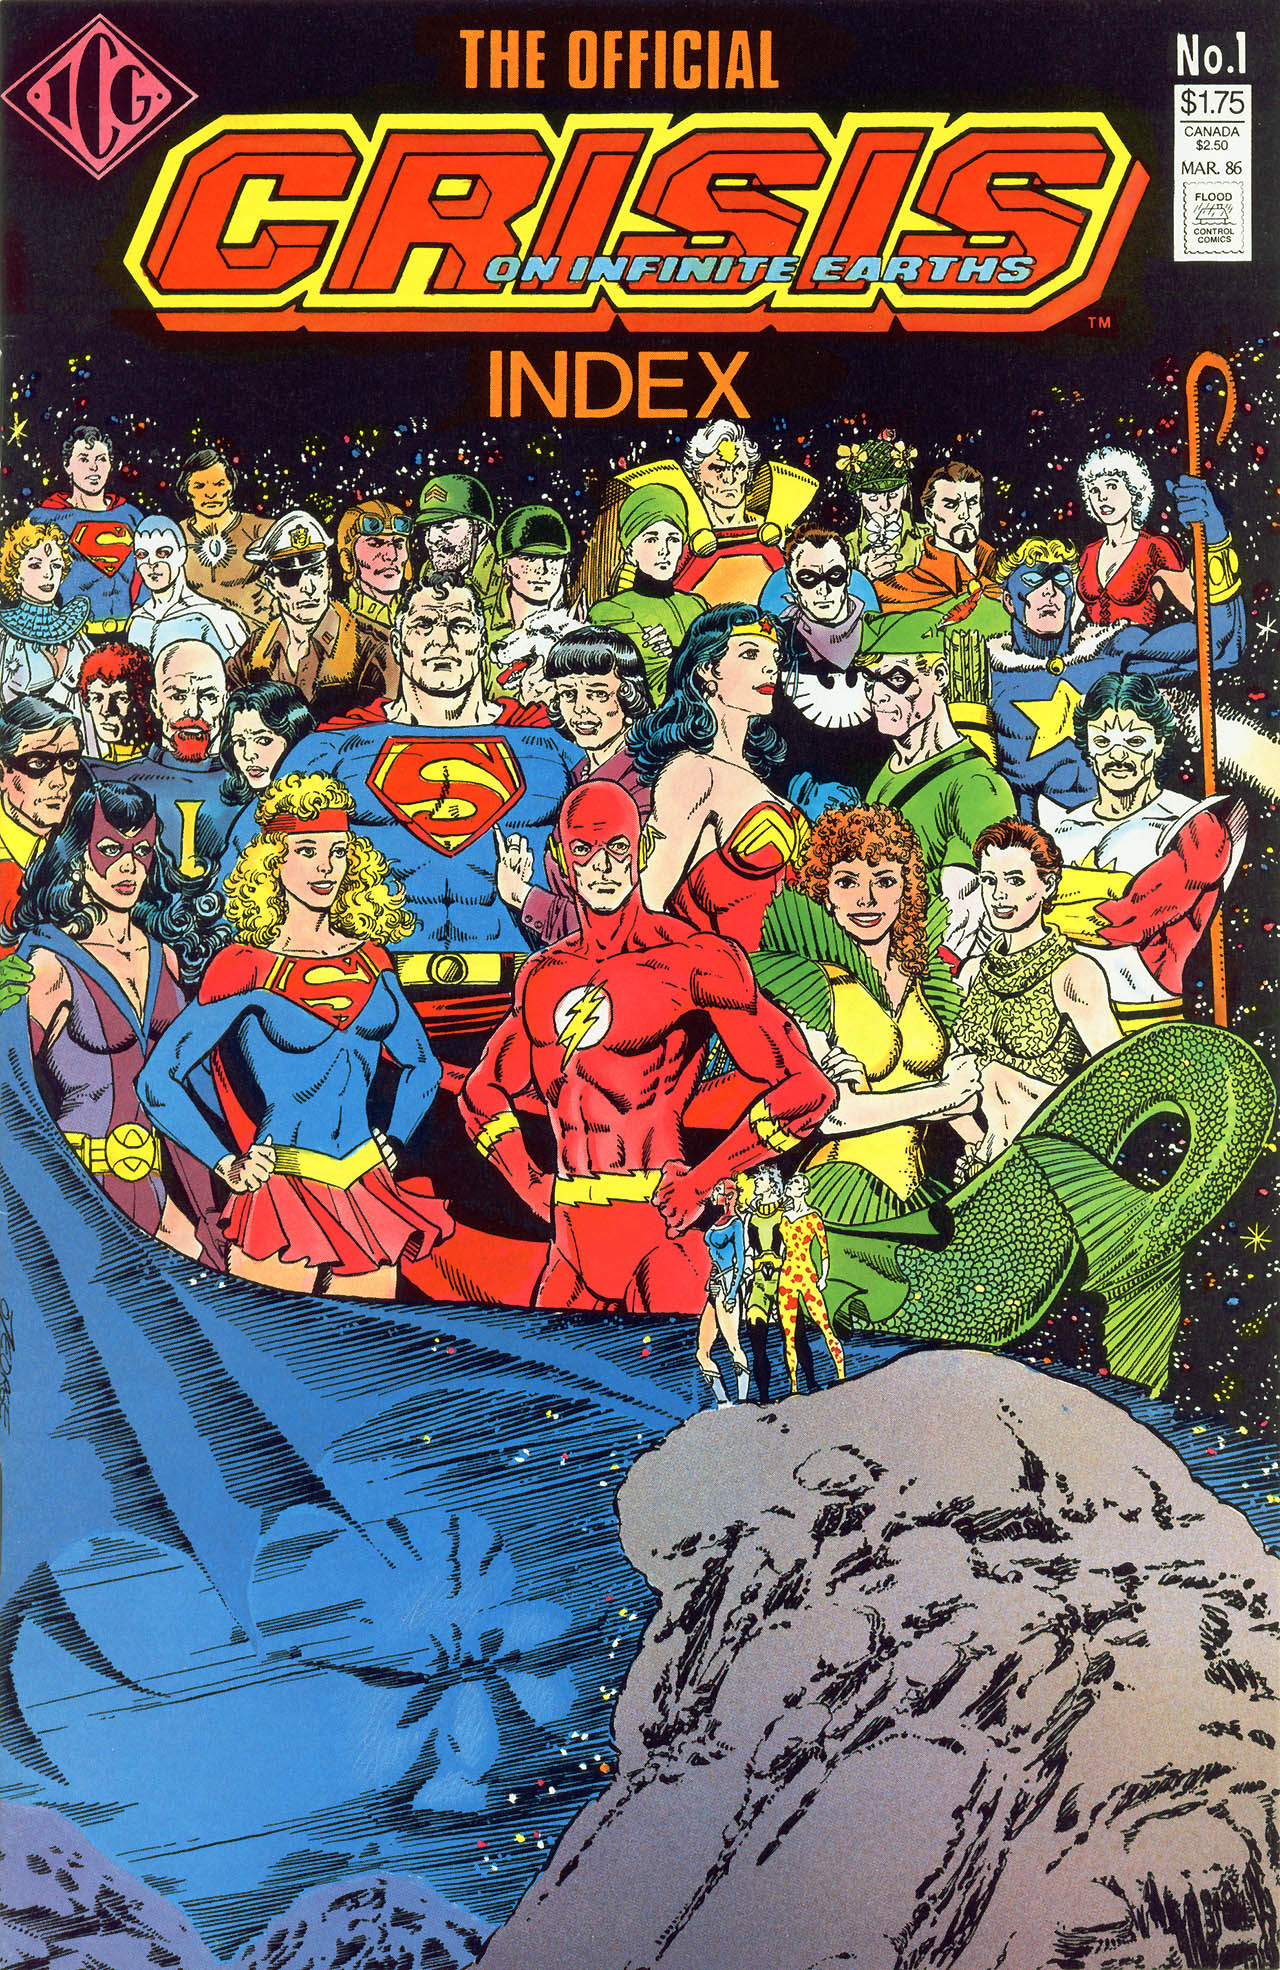 Read online The Official Crisis on Infinite Earths Index comic -  Issue # Full - 1